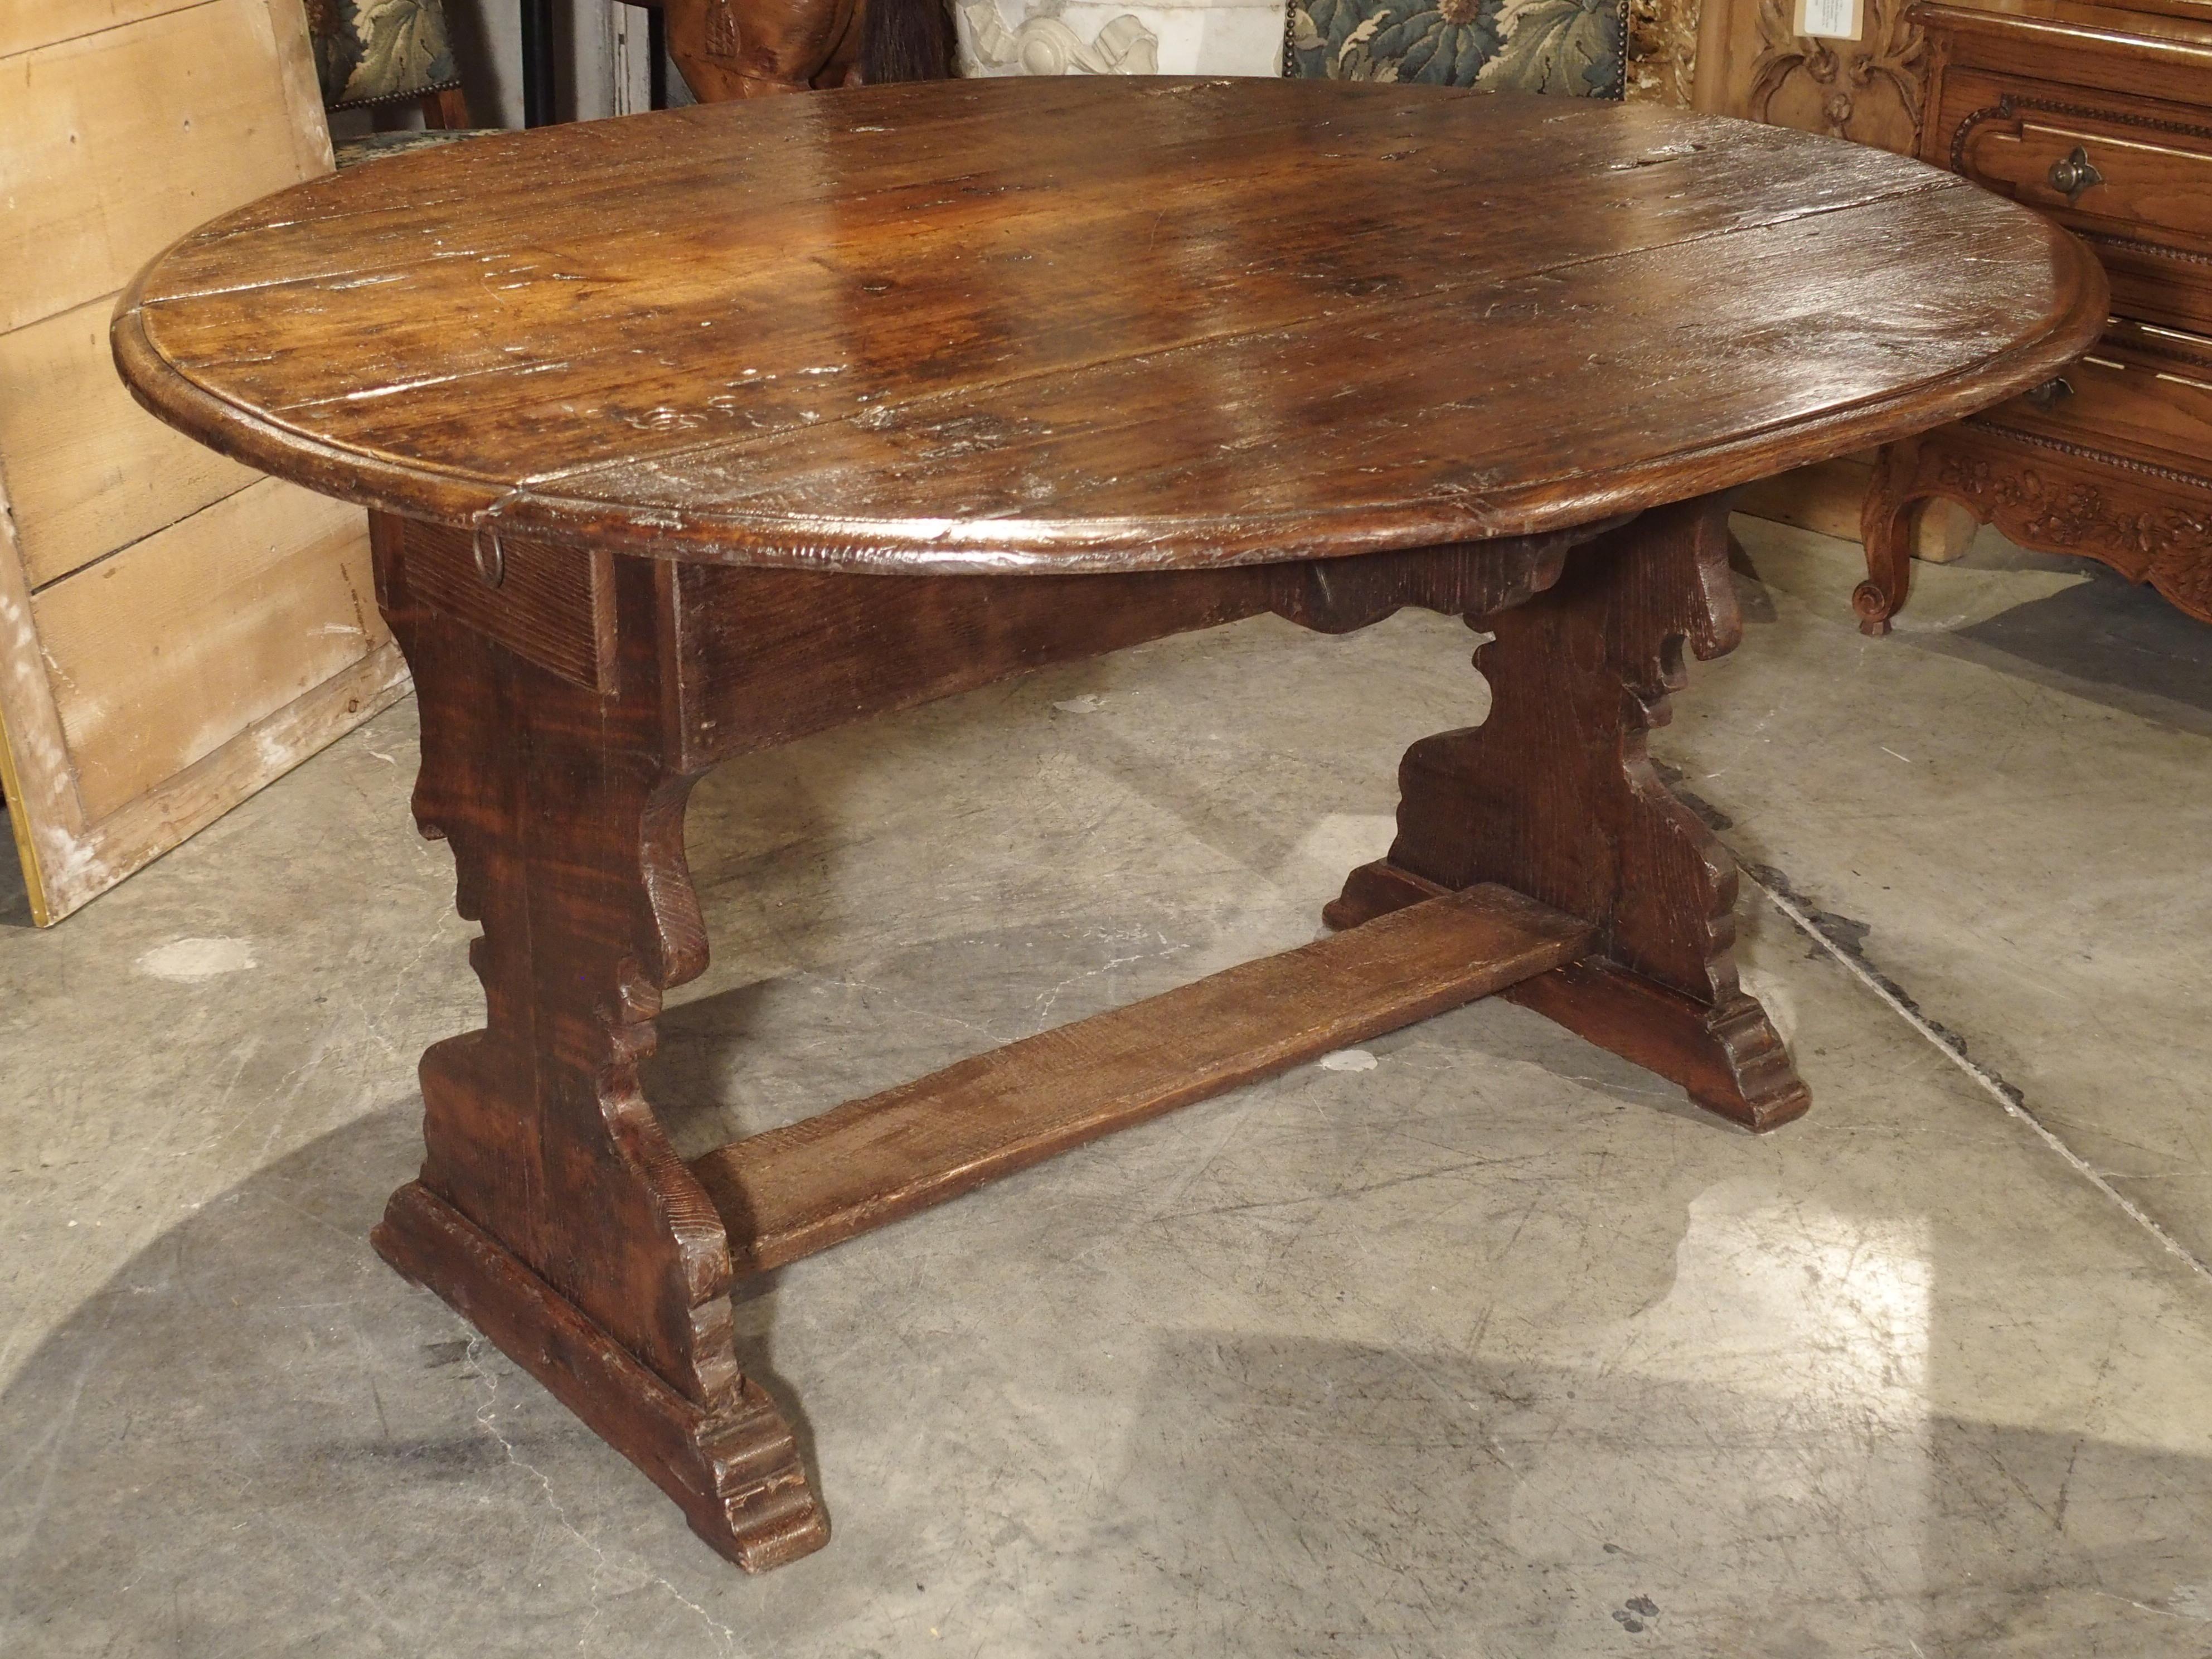 Antique Chestnut Wood Drop Leaf Table from Italy, circa 1790 10